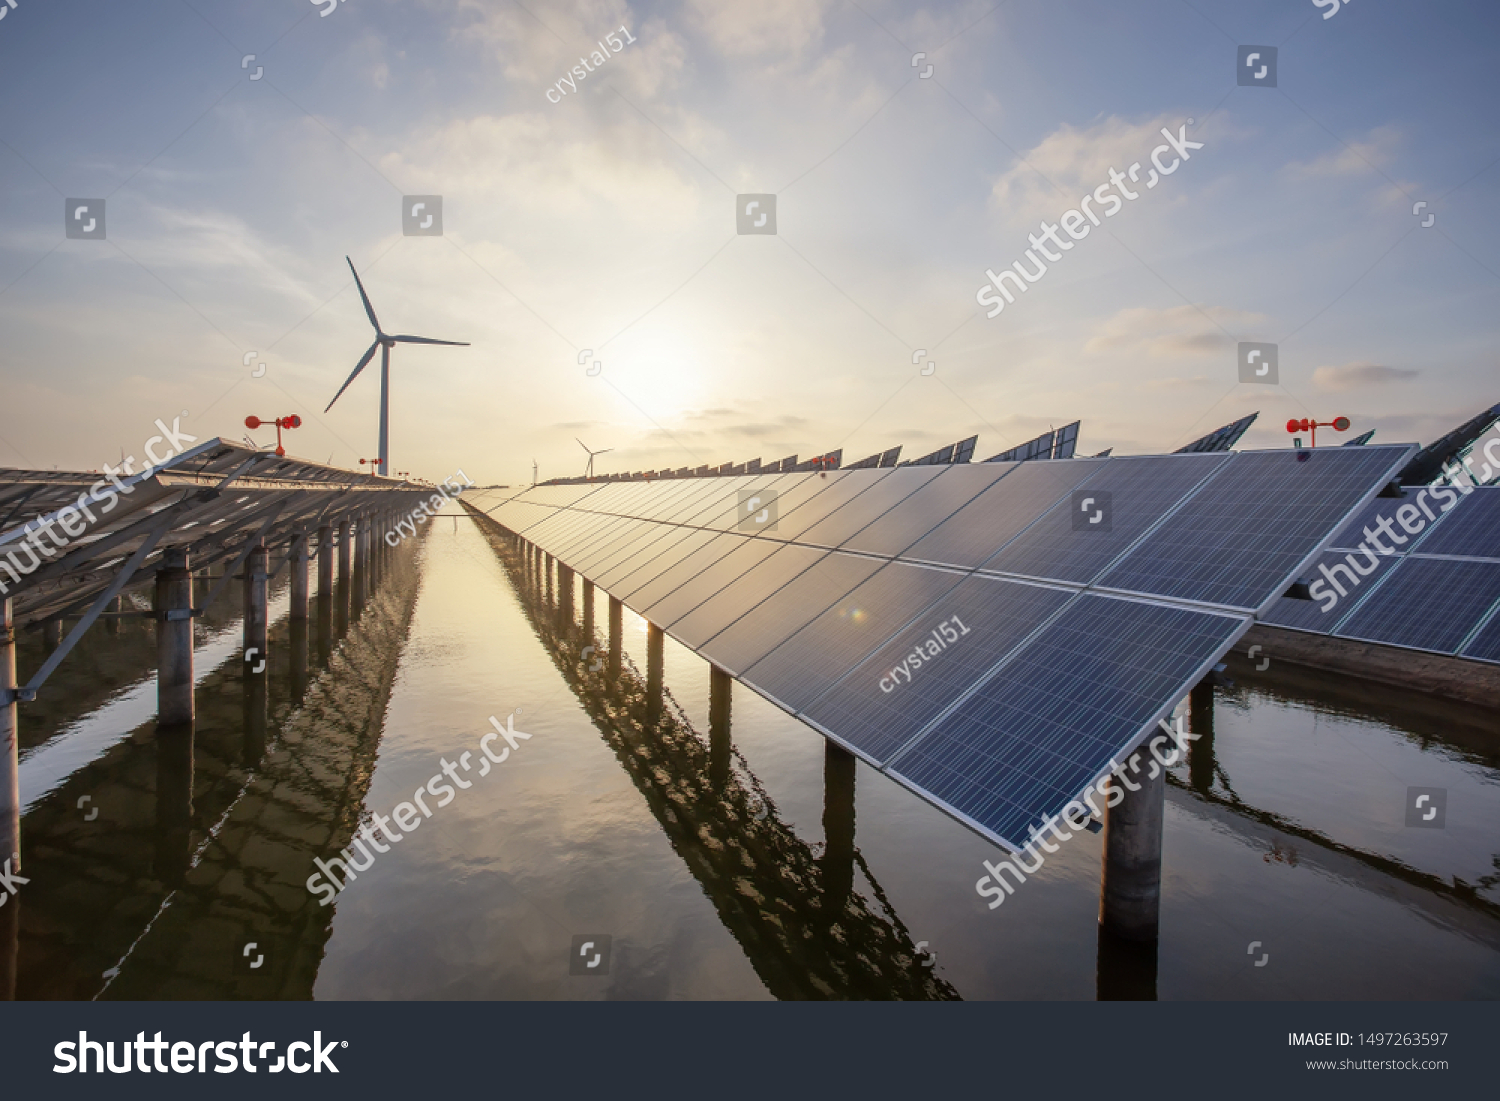 Solar panels and wind power, clean energy in nature #1497263597